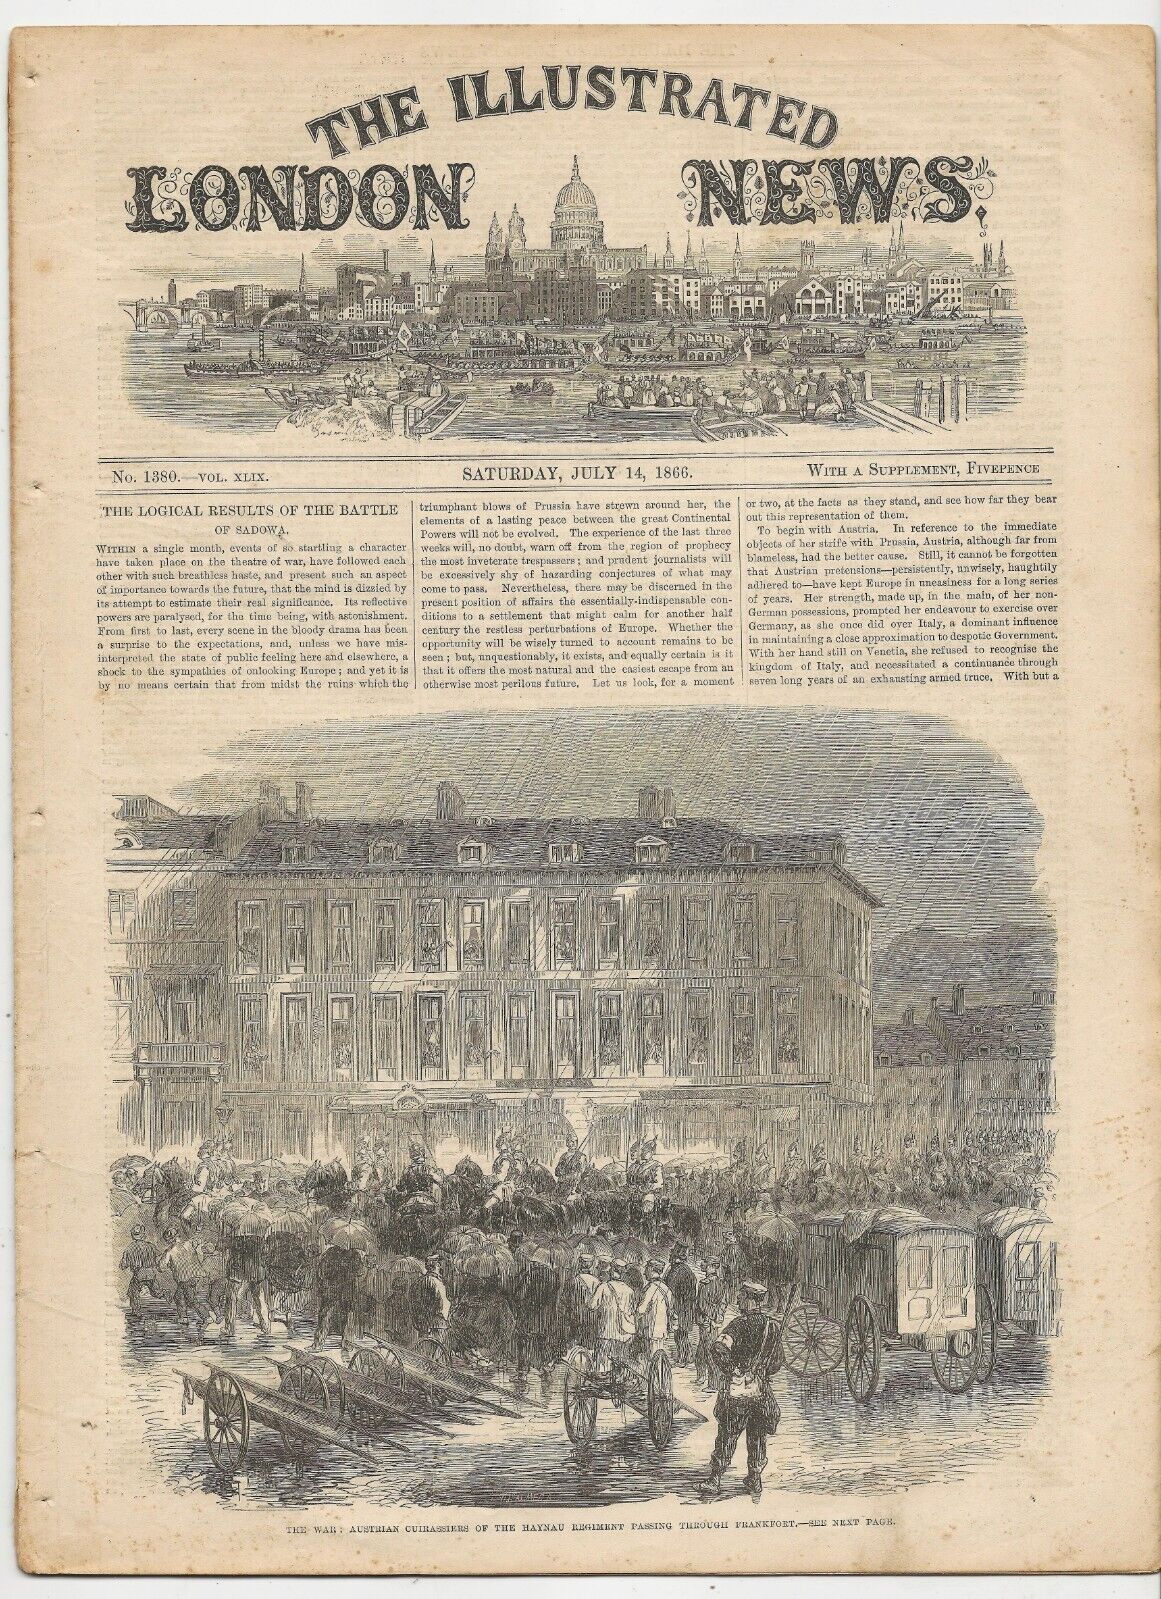 July 14, 1866 Illustrated London News - Wedding of Princess Helena - Great Cond